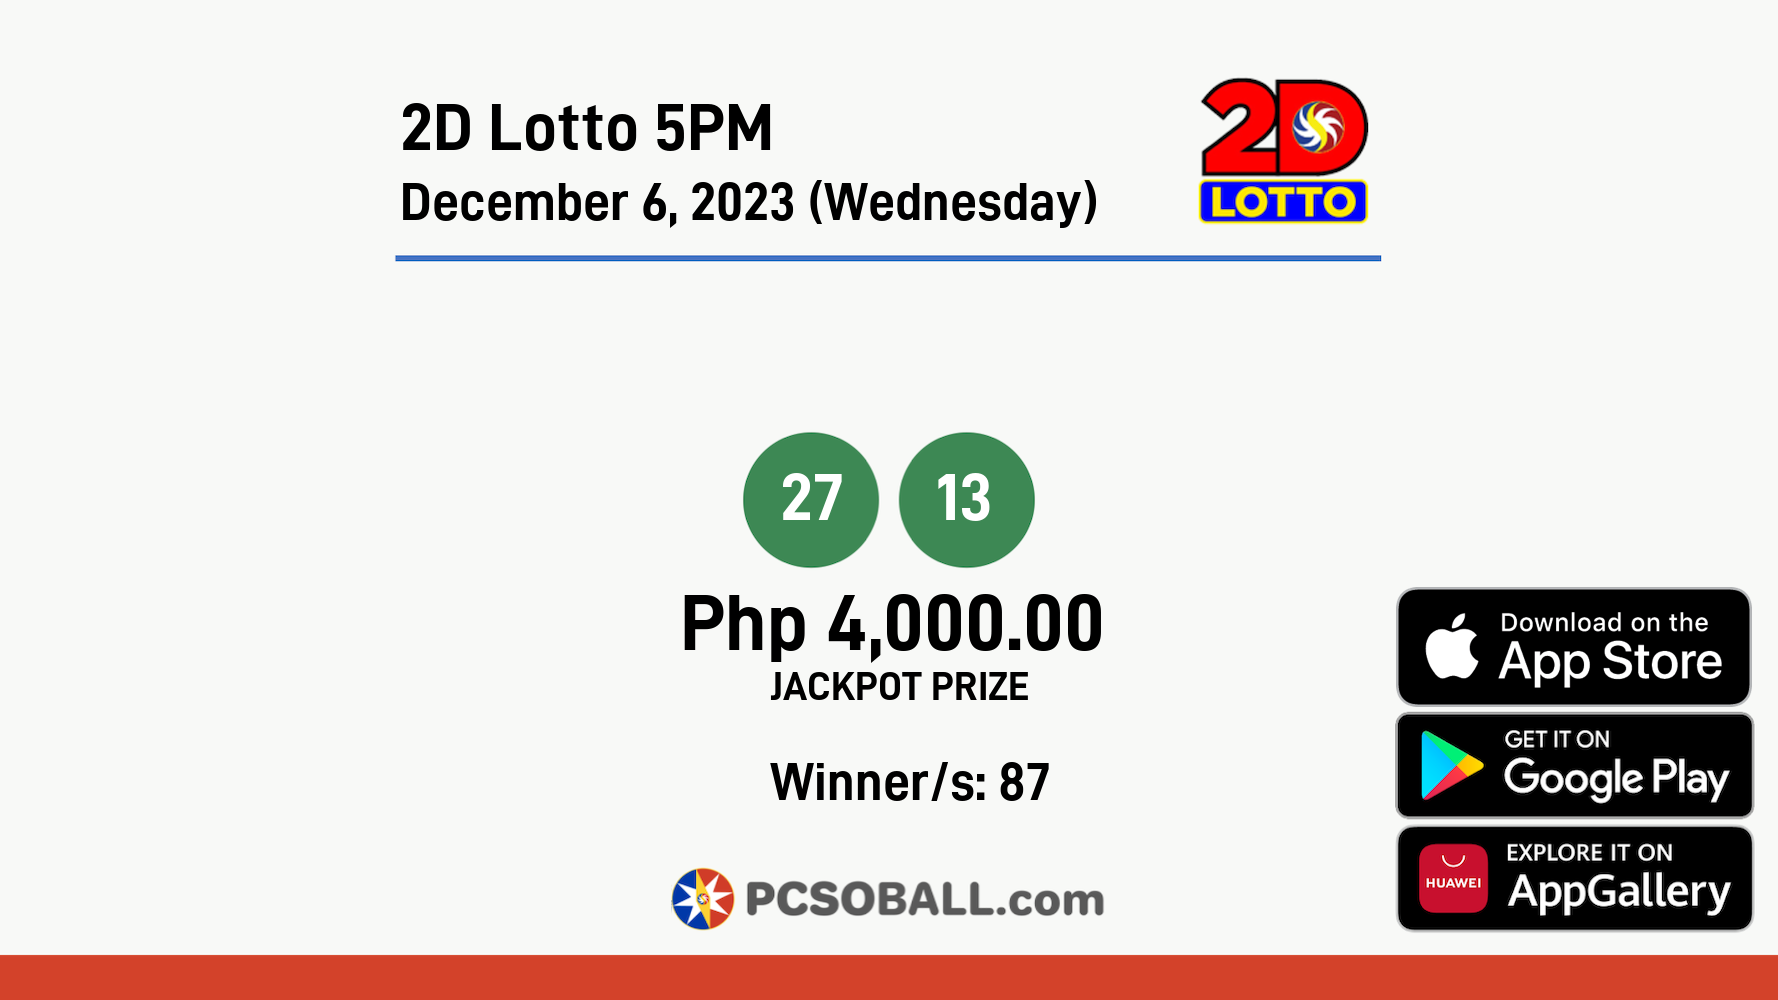 2D Lotto 5PM December 6, 2023 (Wednesday) Result